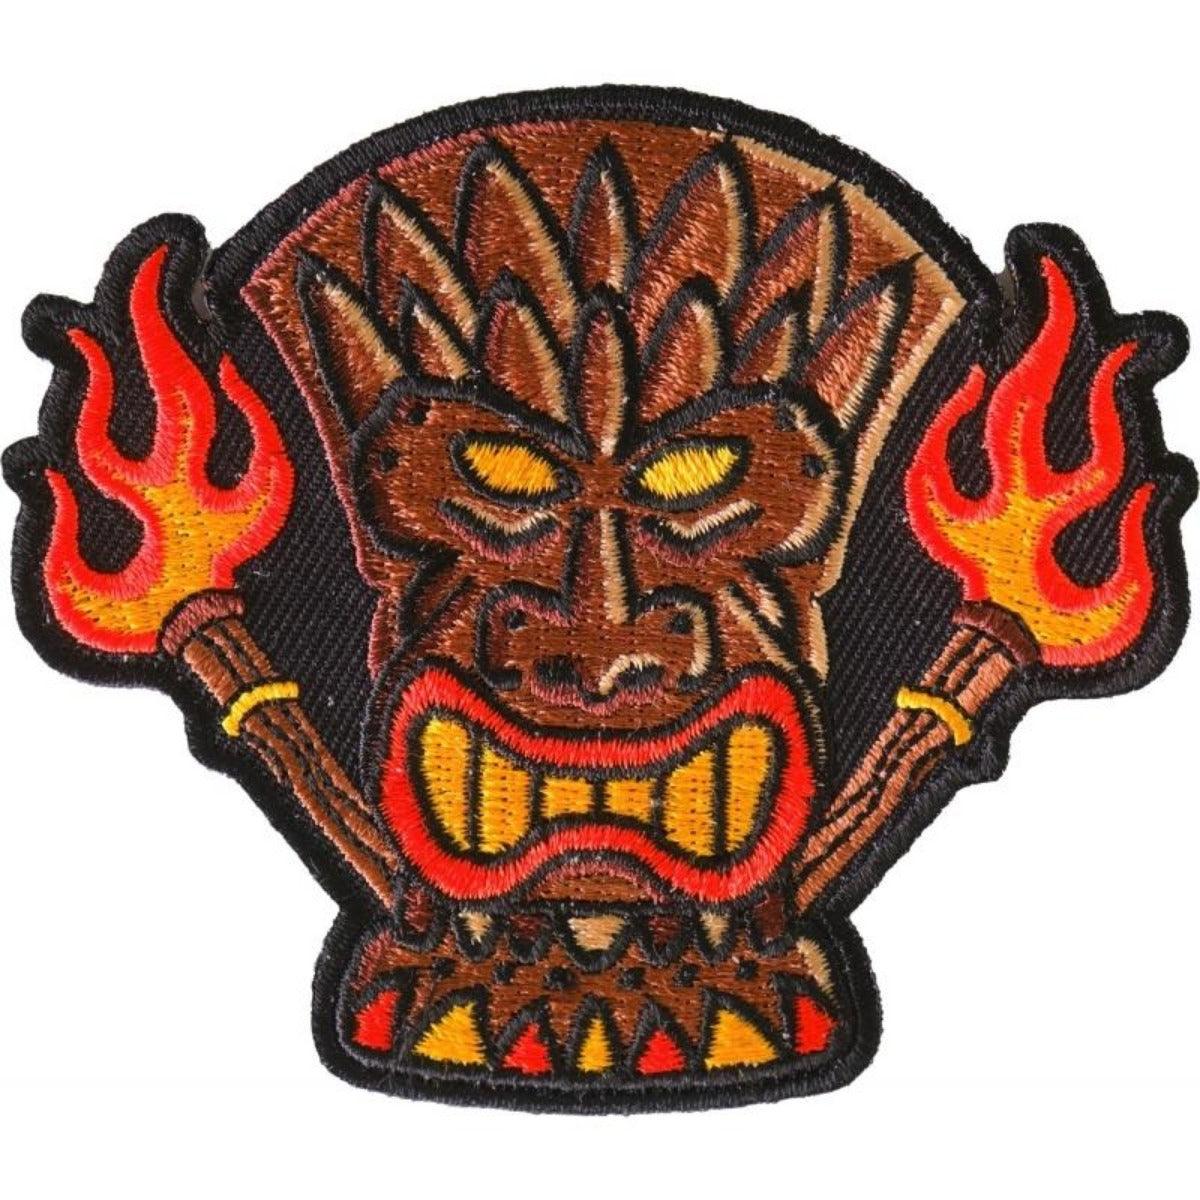 Daniel Smart Tiki Totem Embroidered Iron On Patch, 3.5 x 3 inches - American Legend Rider